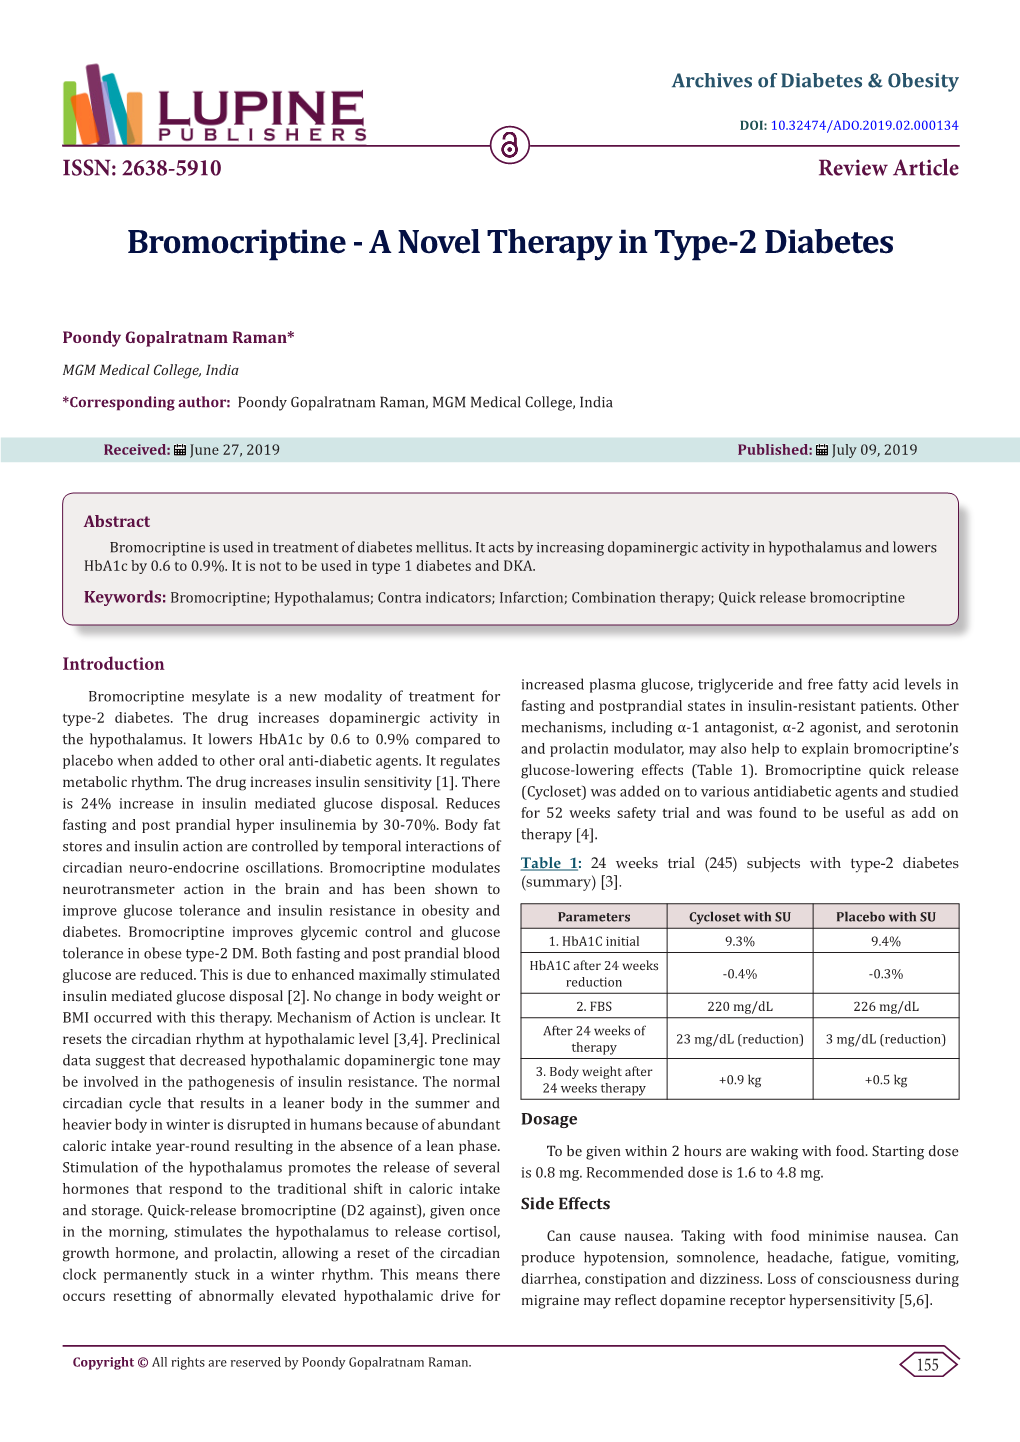 Bromocriptine - a Novel Therapy in Type-2 Diabetes